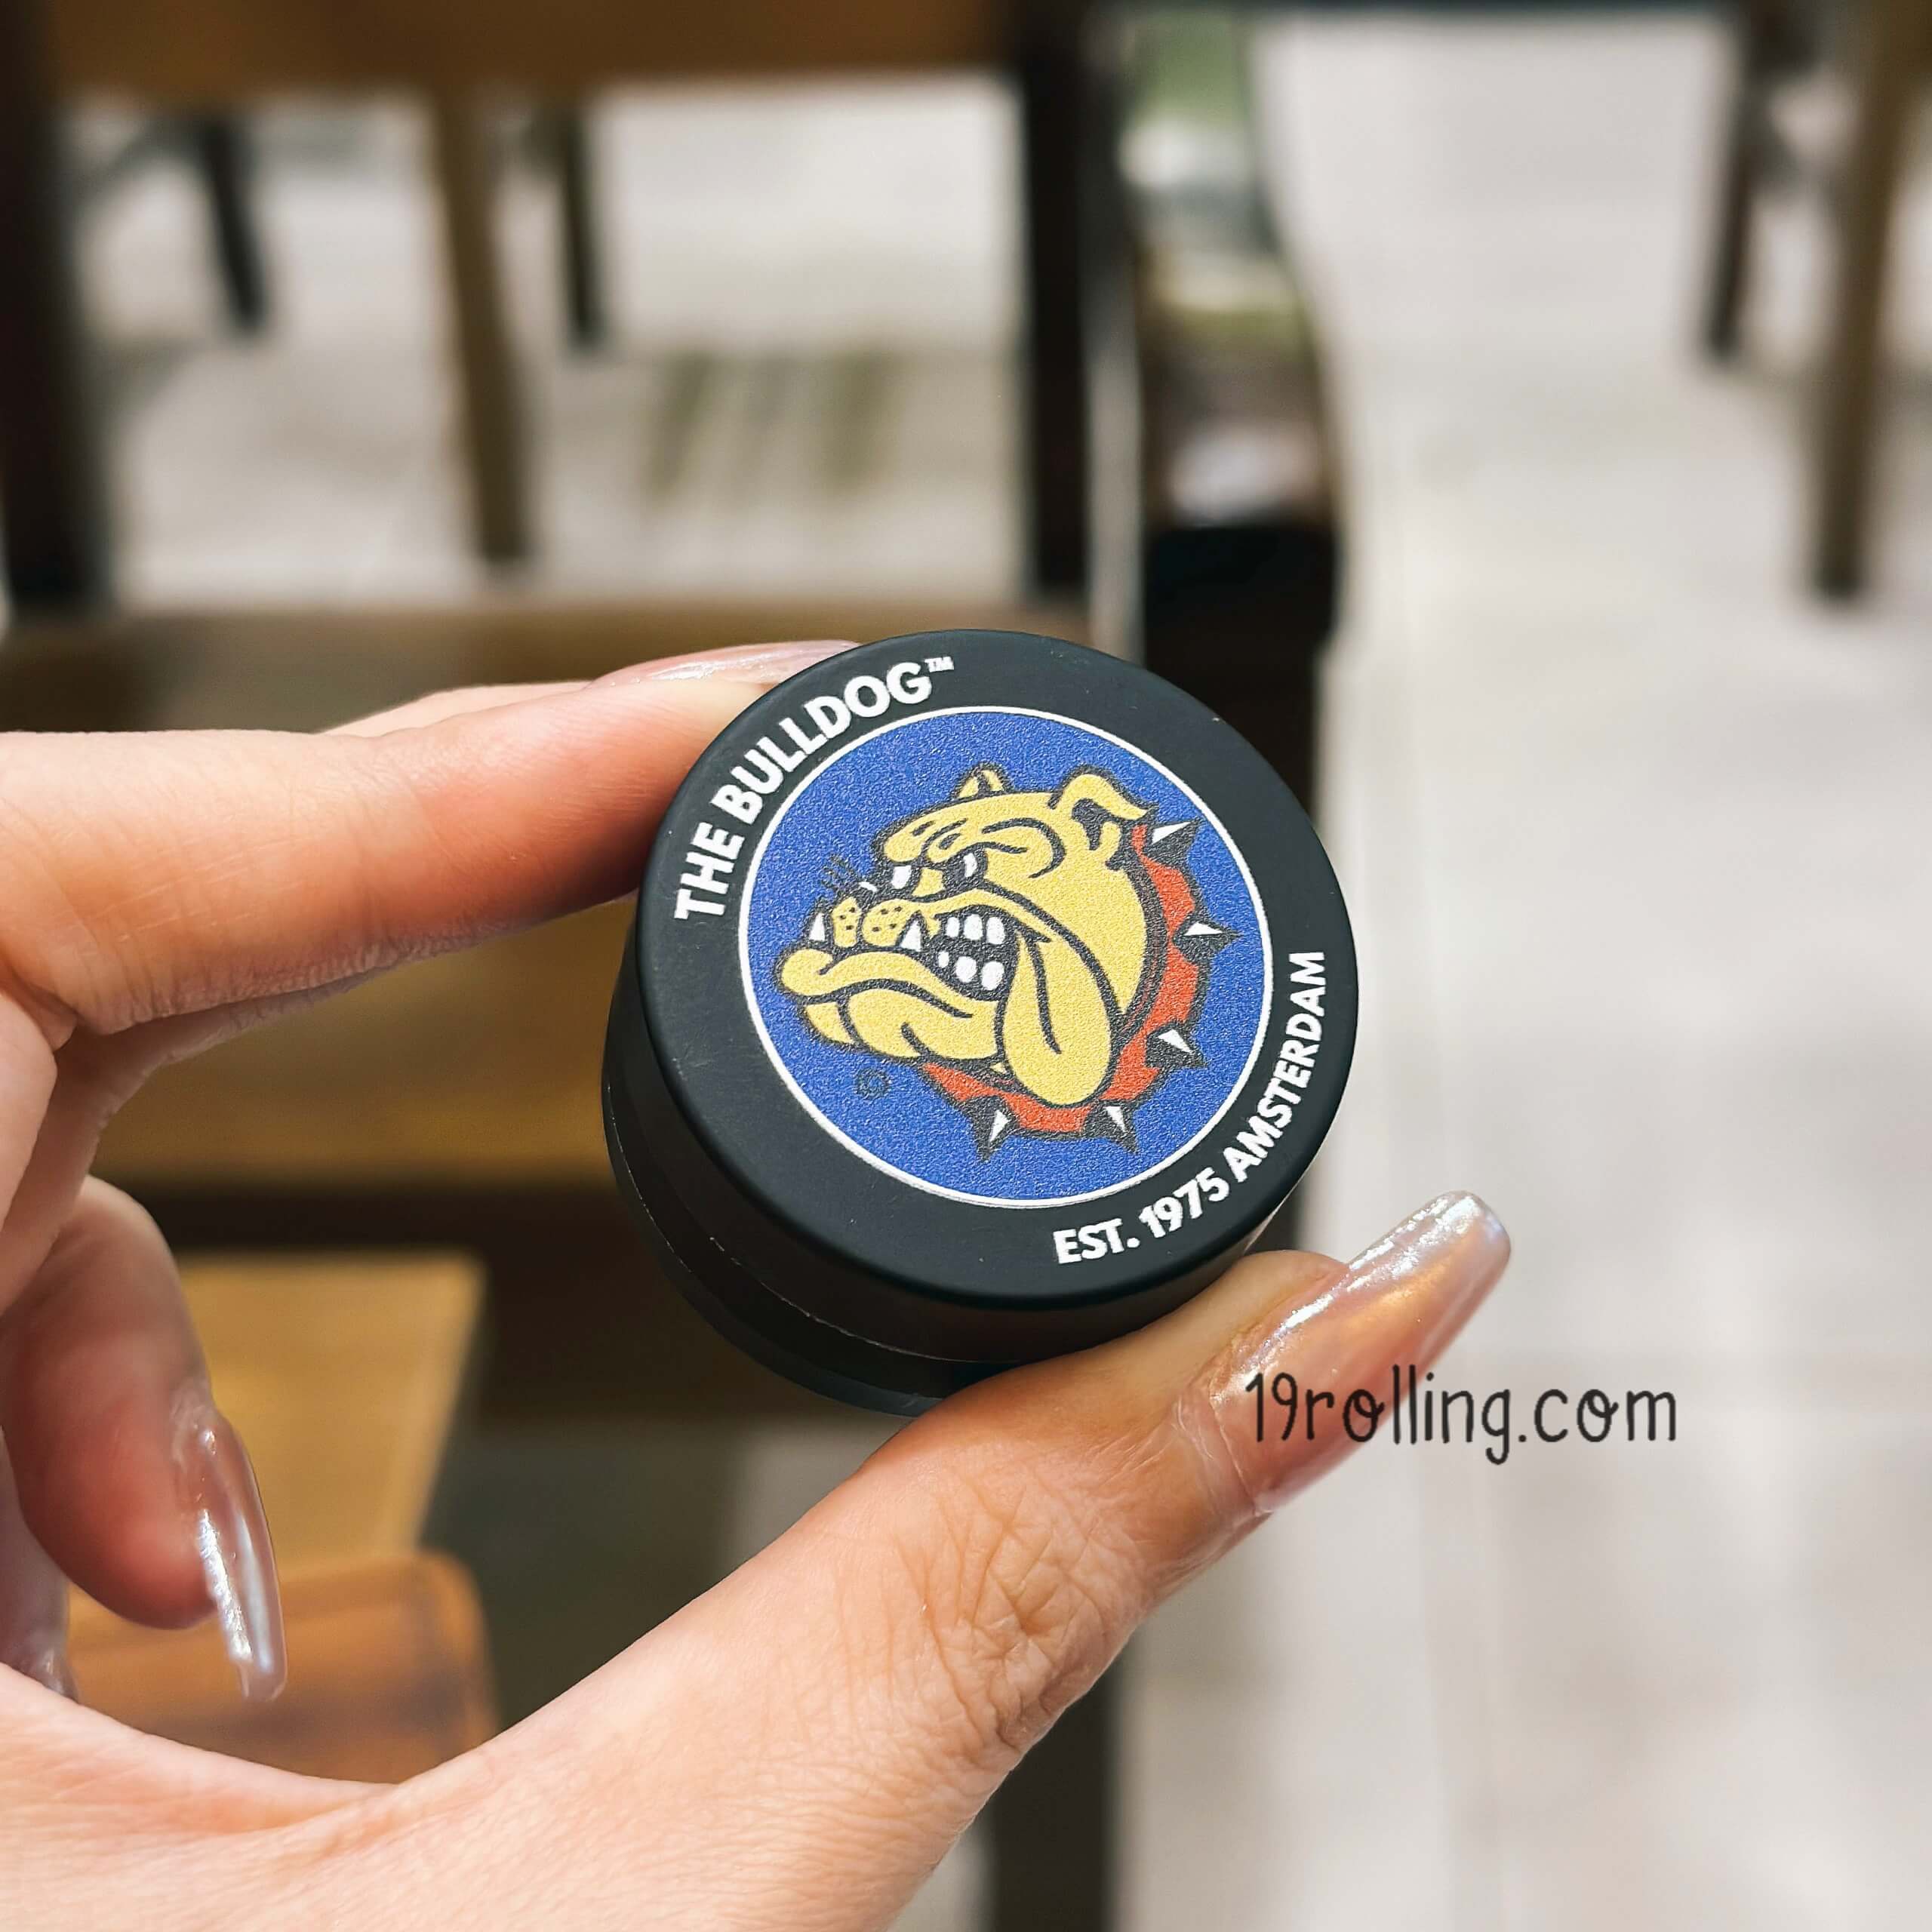 40MM-The-BullDog-Grinder-3-Pieces